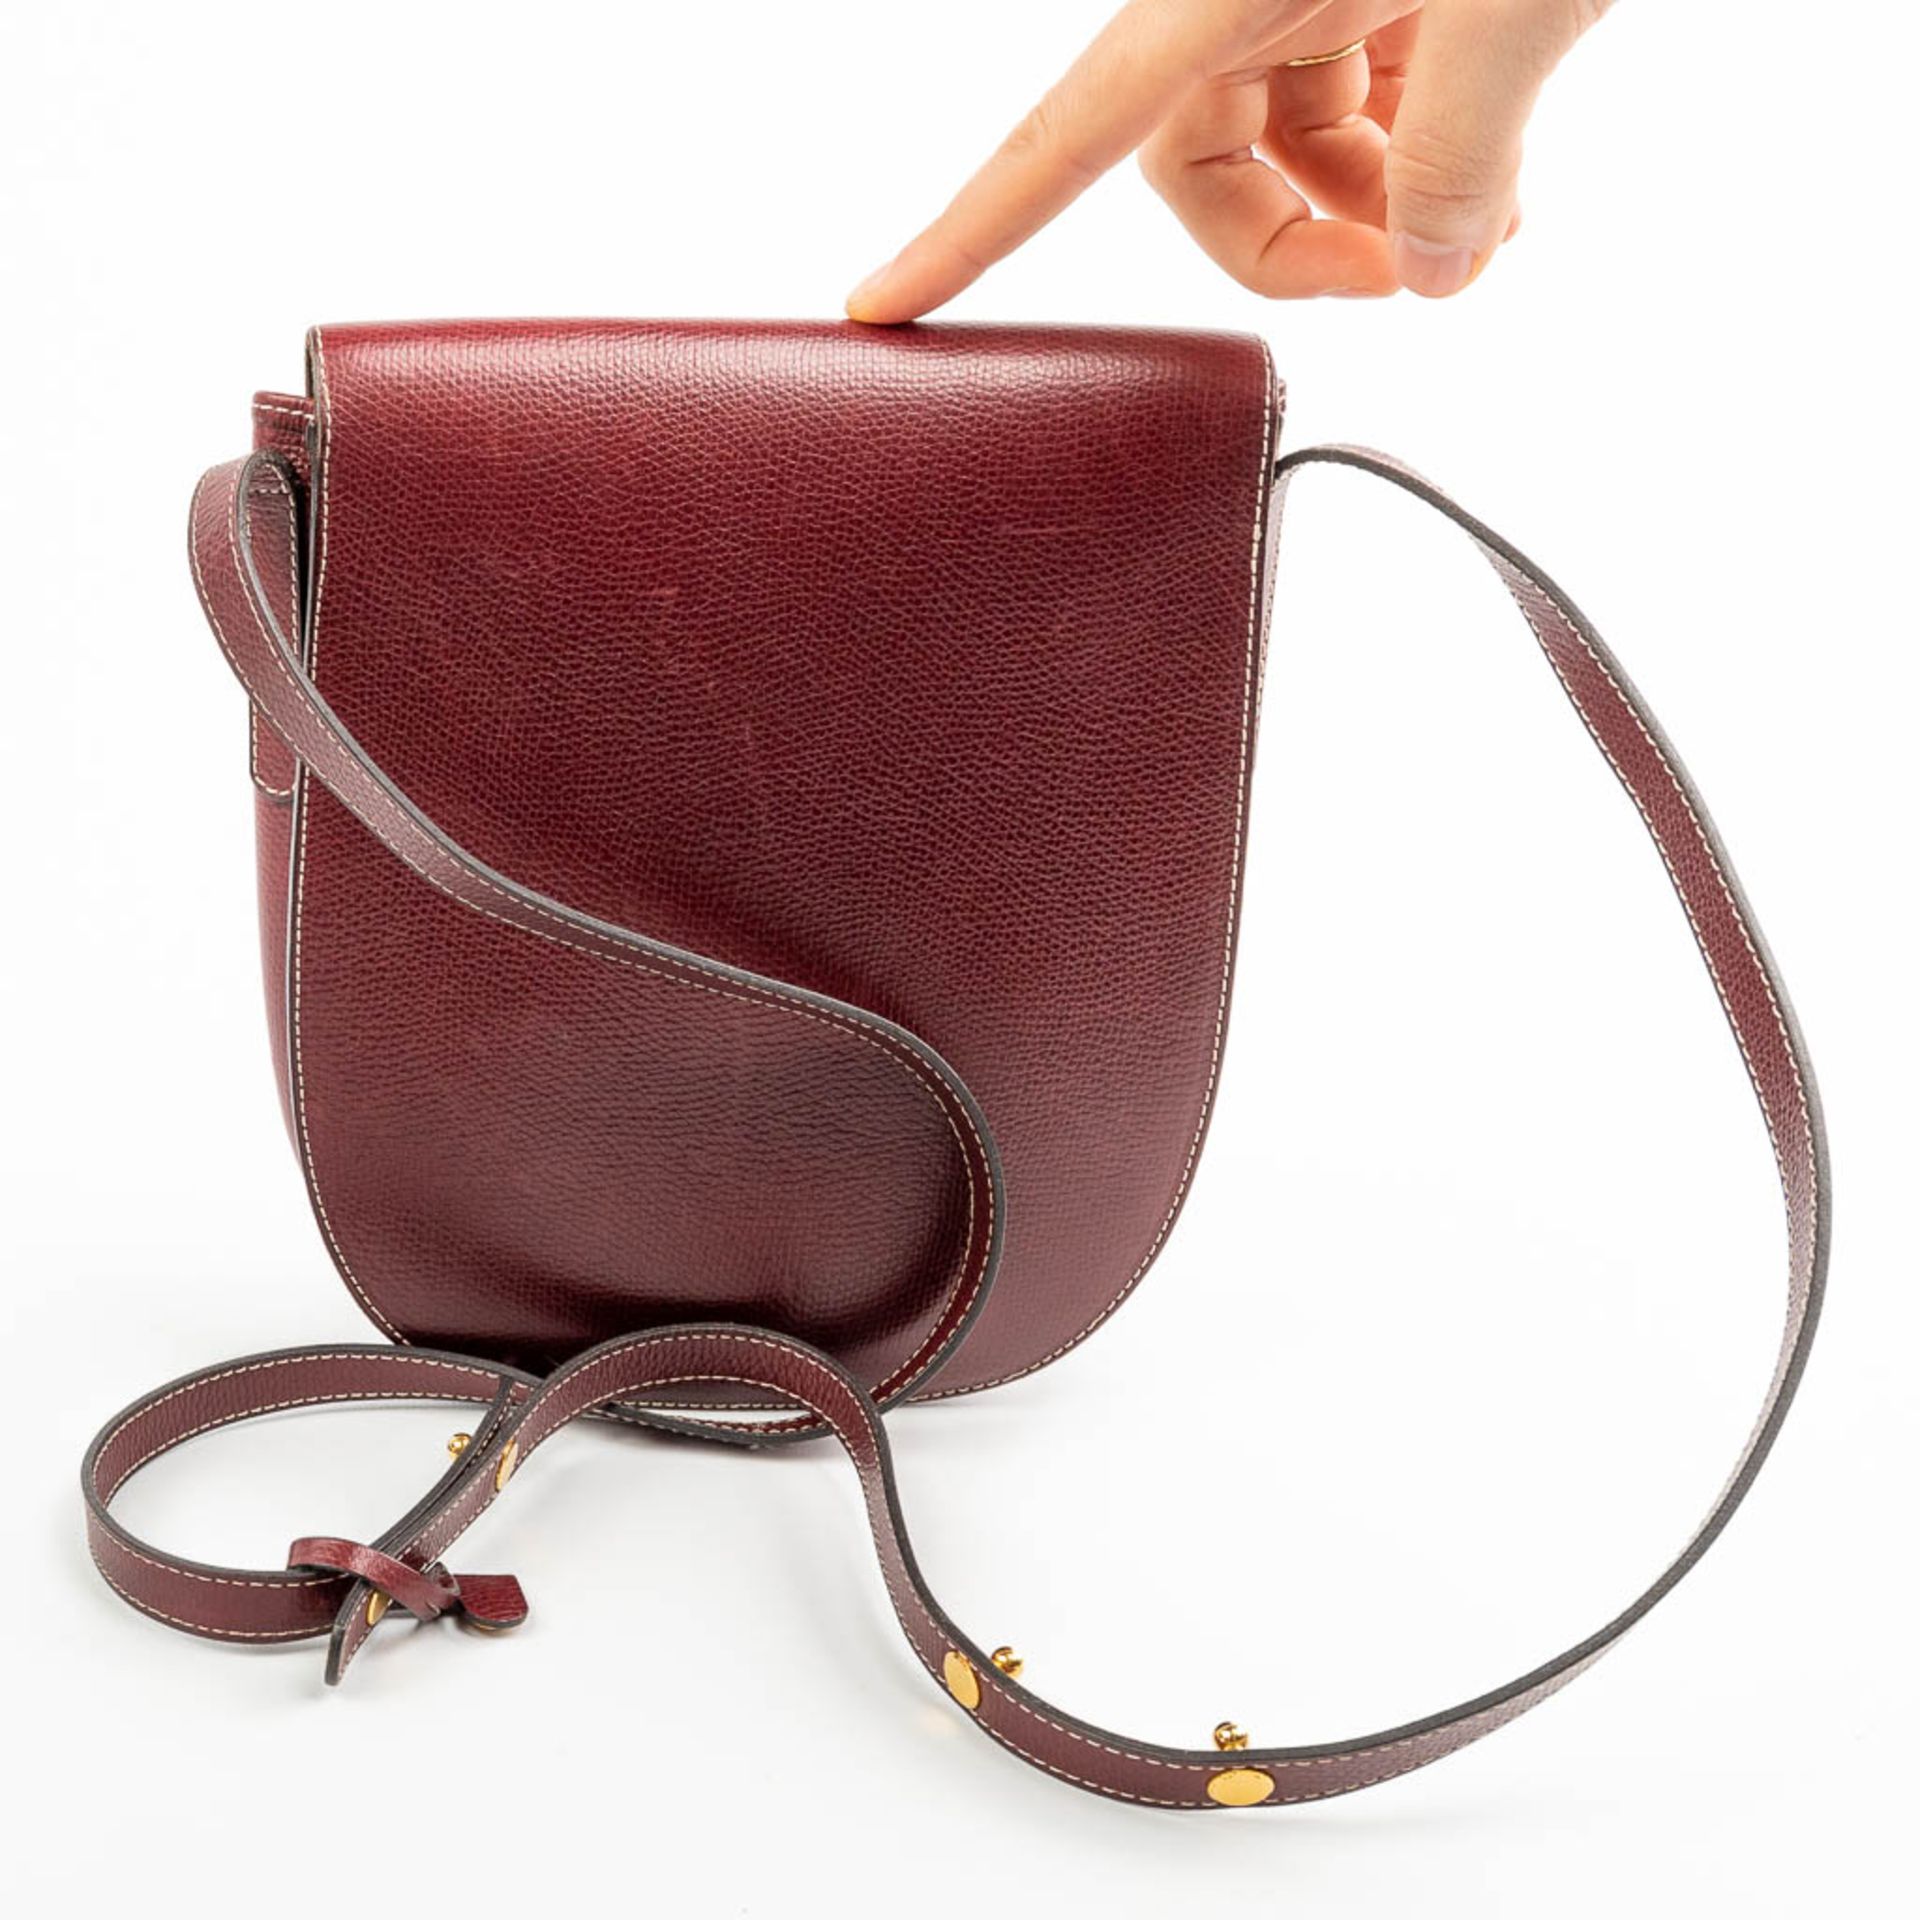 A purse made of red leather and marked Delvaux. - Image 6 of 10